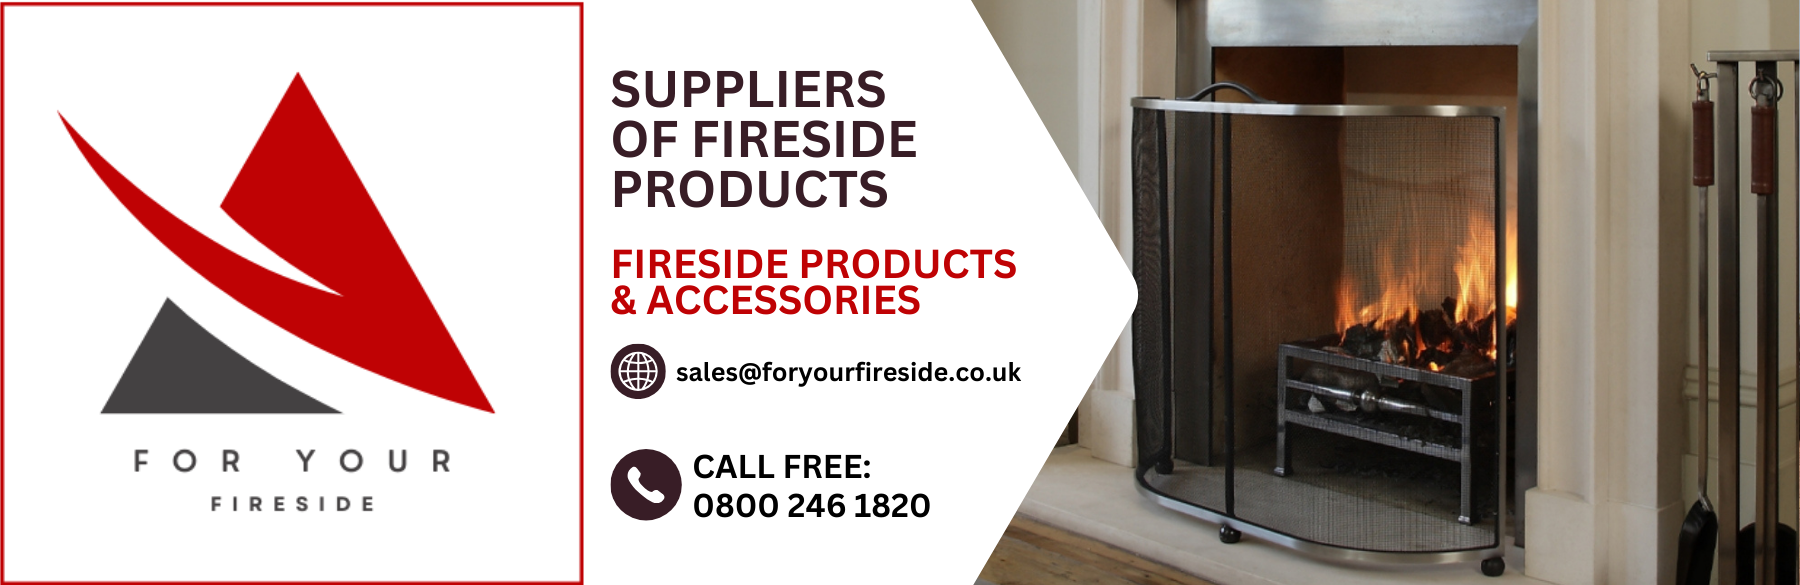 Fireside Products